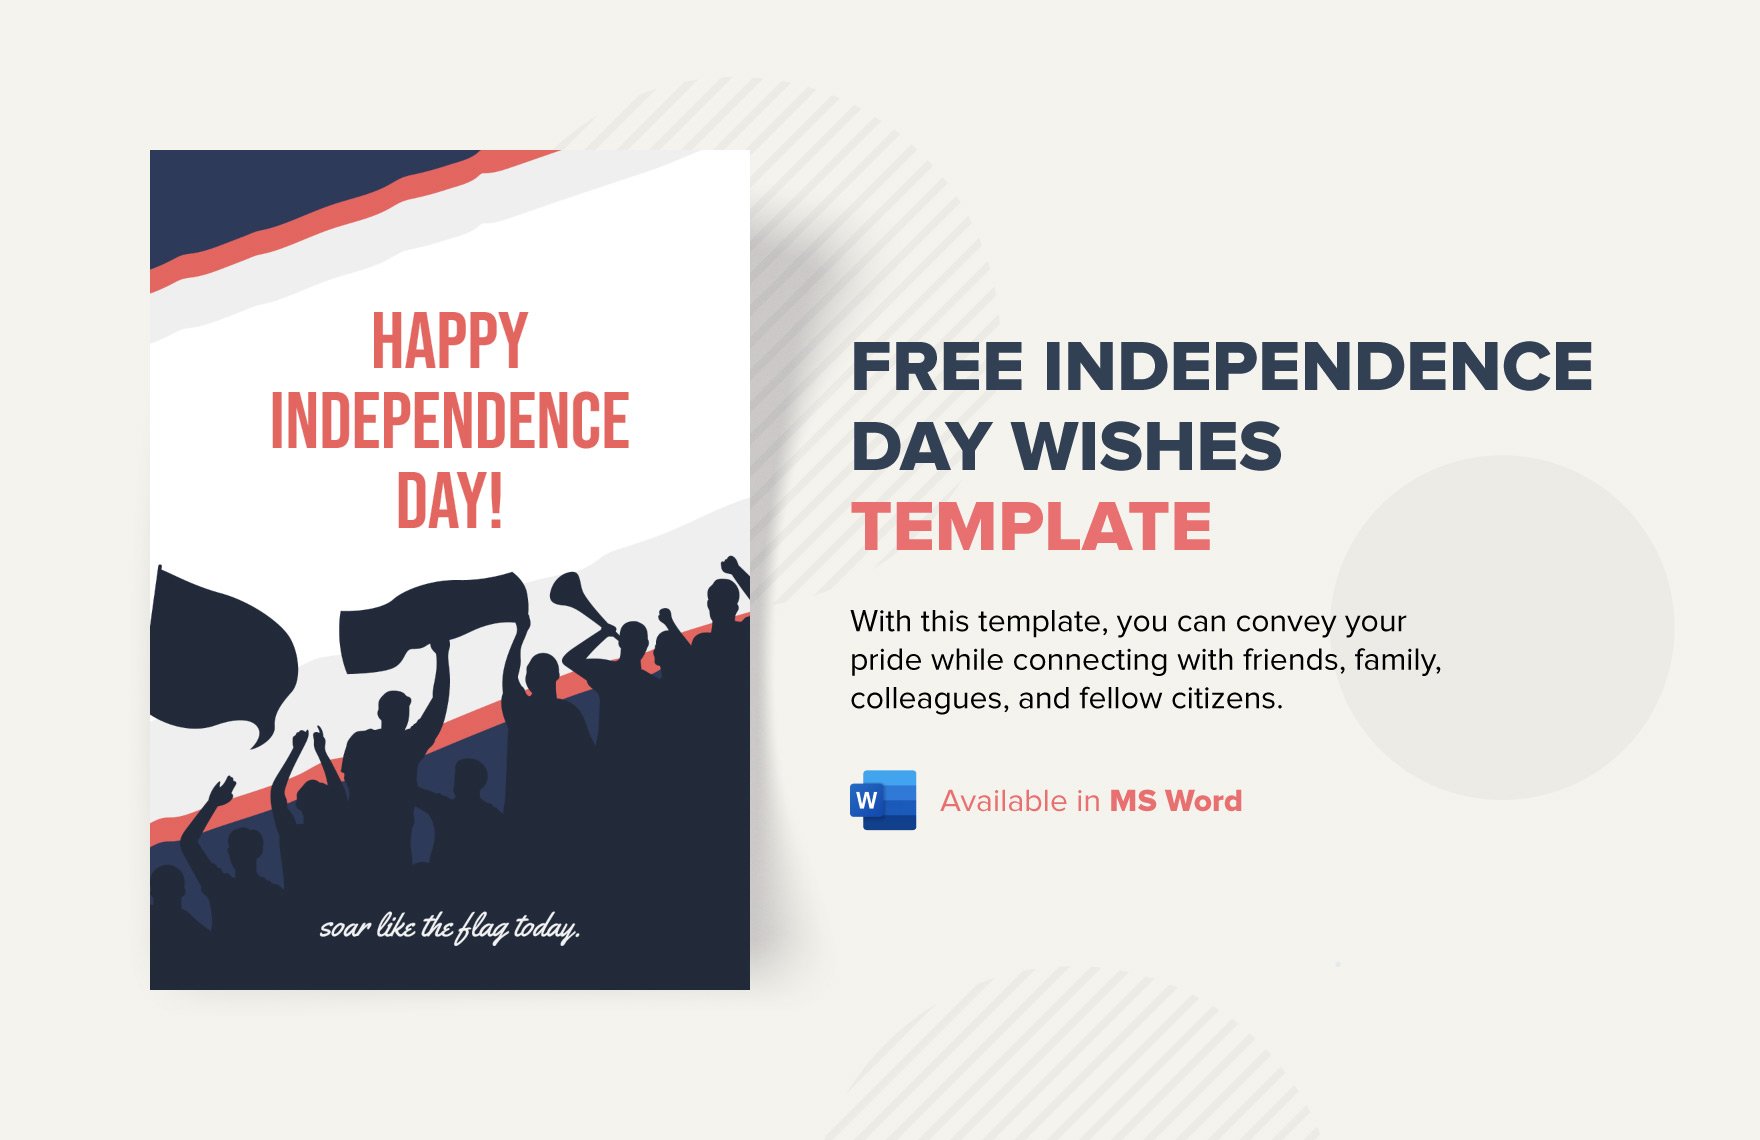 Free Independence Day Wishes Template in Word